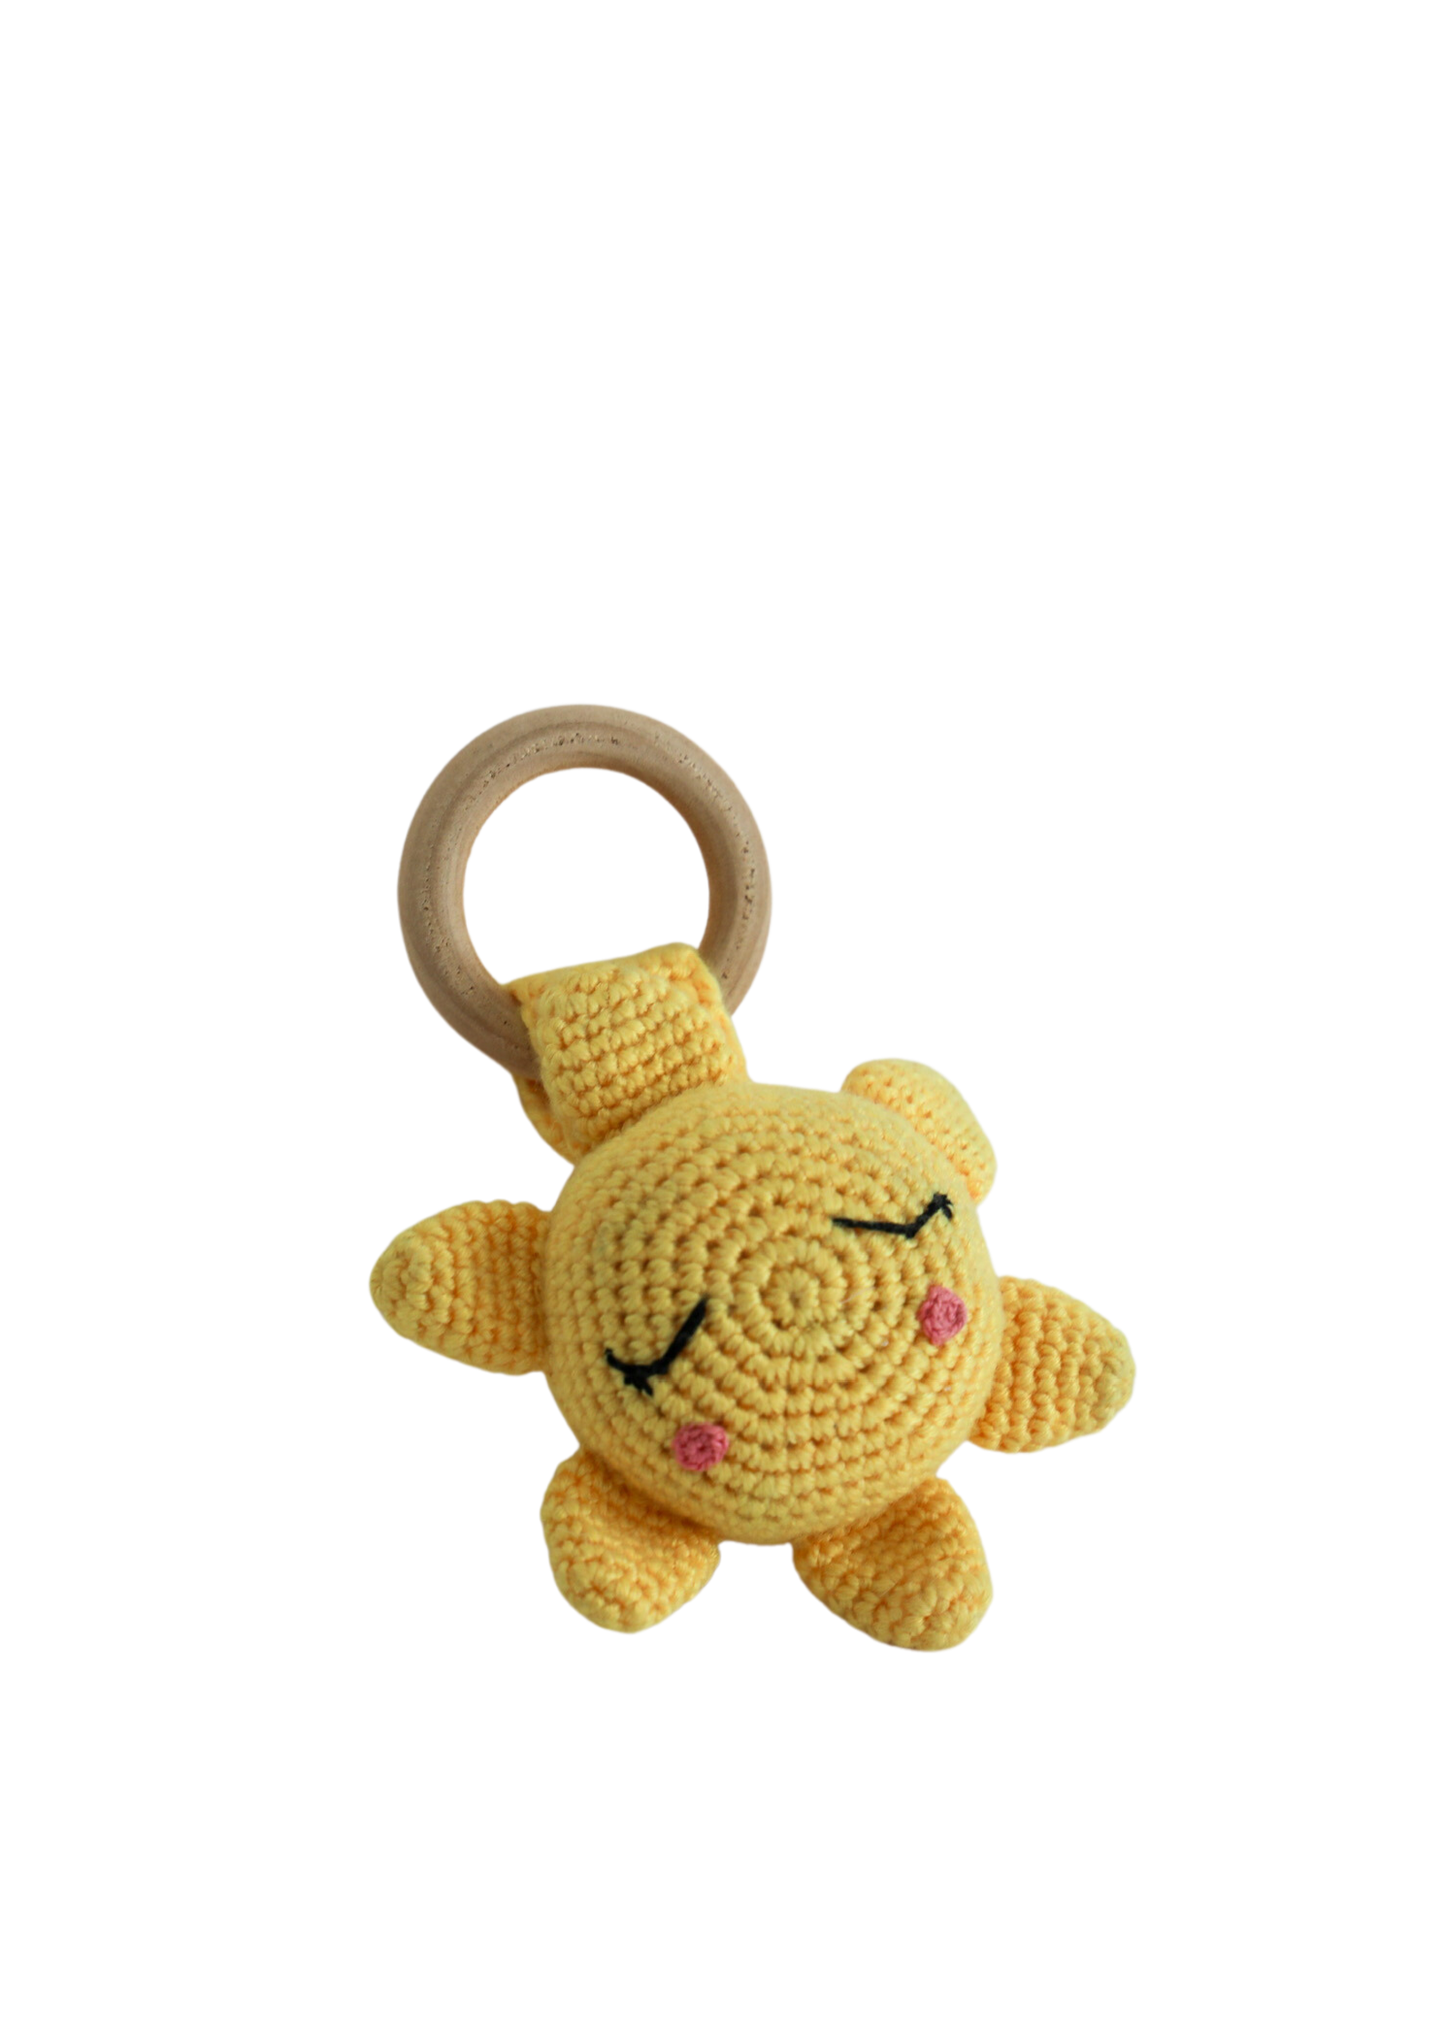 Shake up your playtime with this crochet yellow sun rattle! Adorned with a sweet sun face, this squishy rattle creates a soothing sound when it's shaken, making it the perfect extra-special toy for your little one!